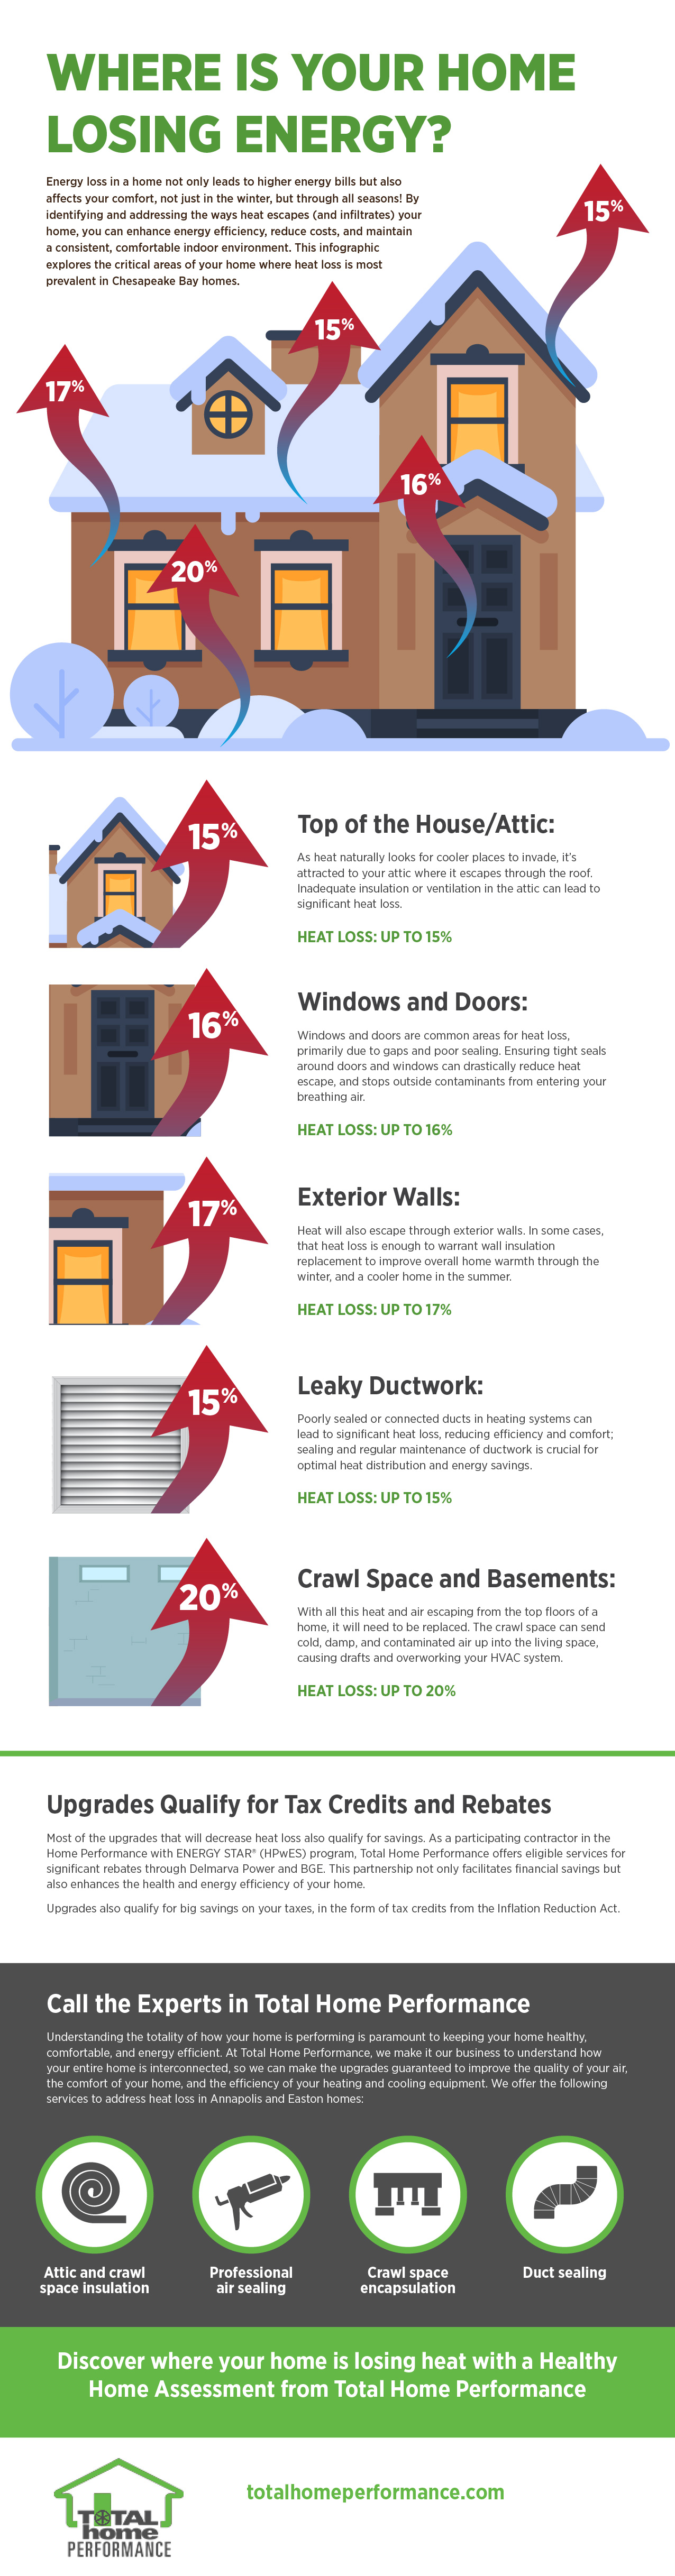 Where Is Your Home Losing Energy? infographic